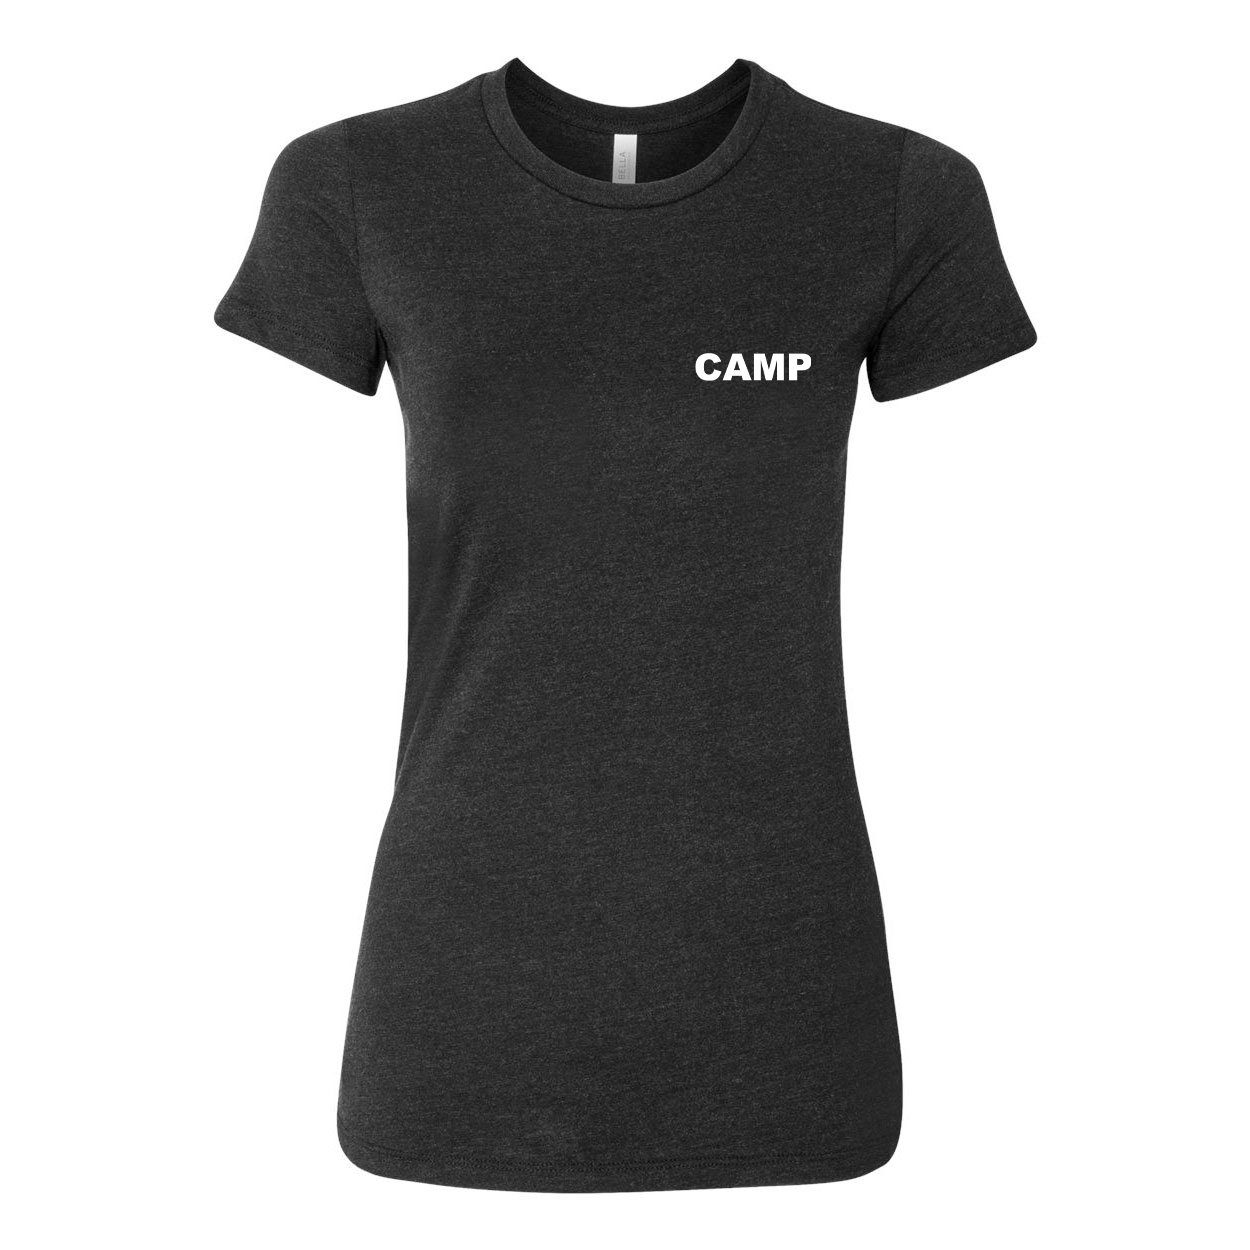 Camp Brand Logo Night Out Womens Fitted T-Shirt Dark Heather Gray